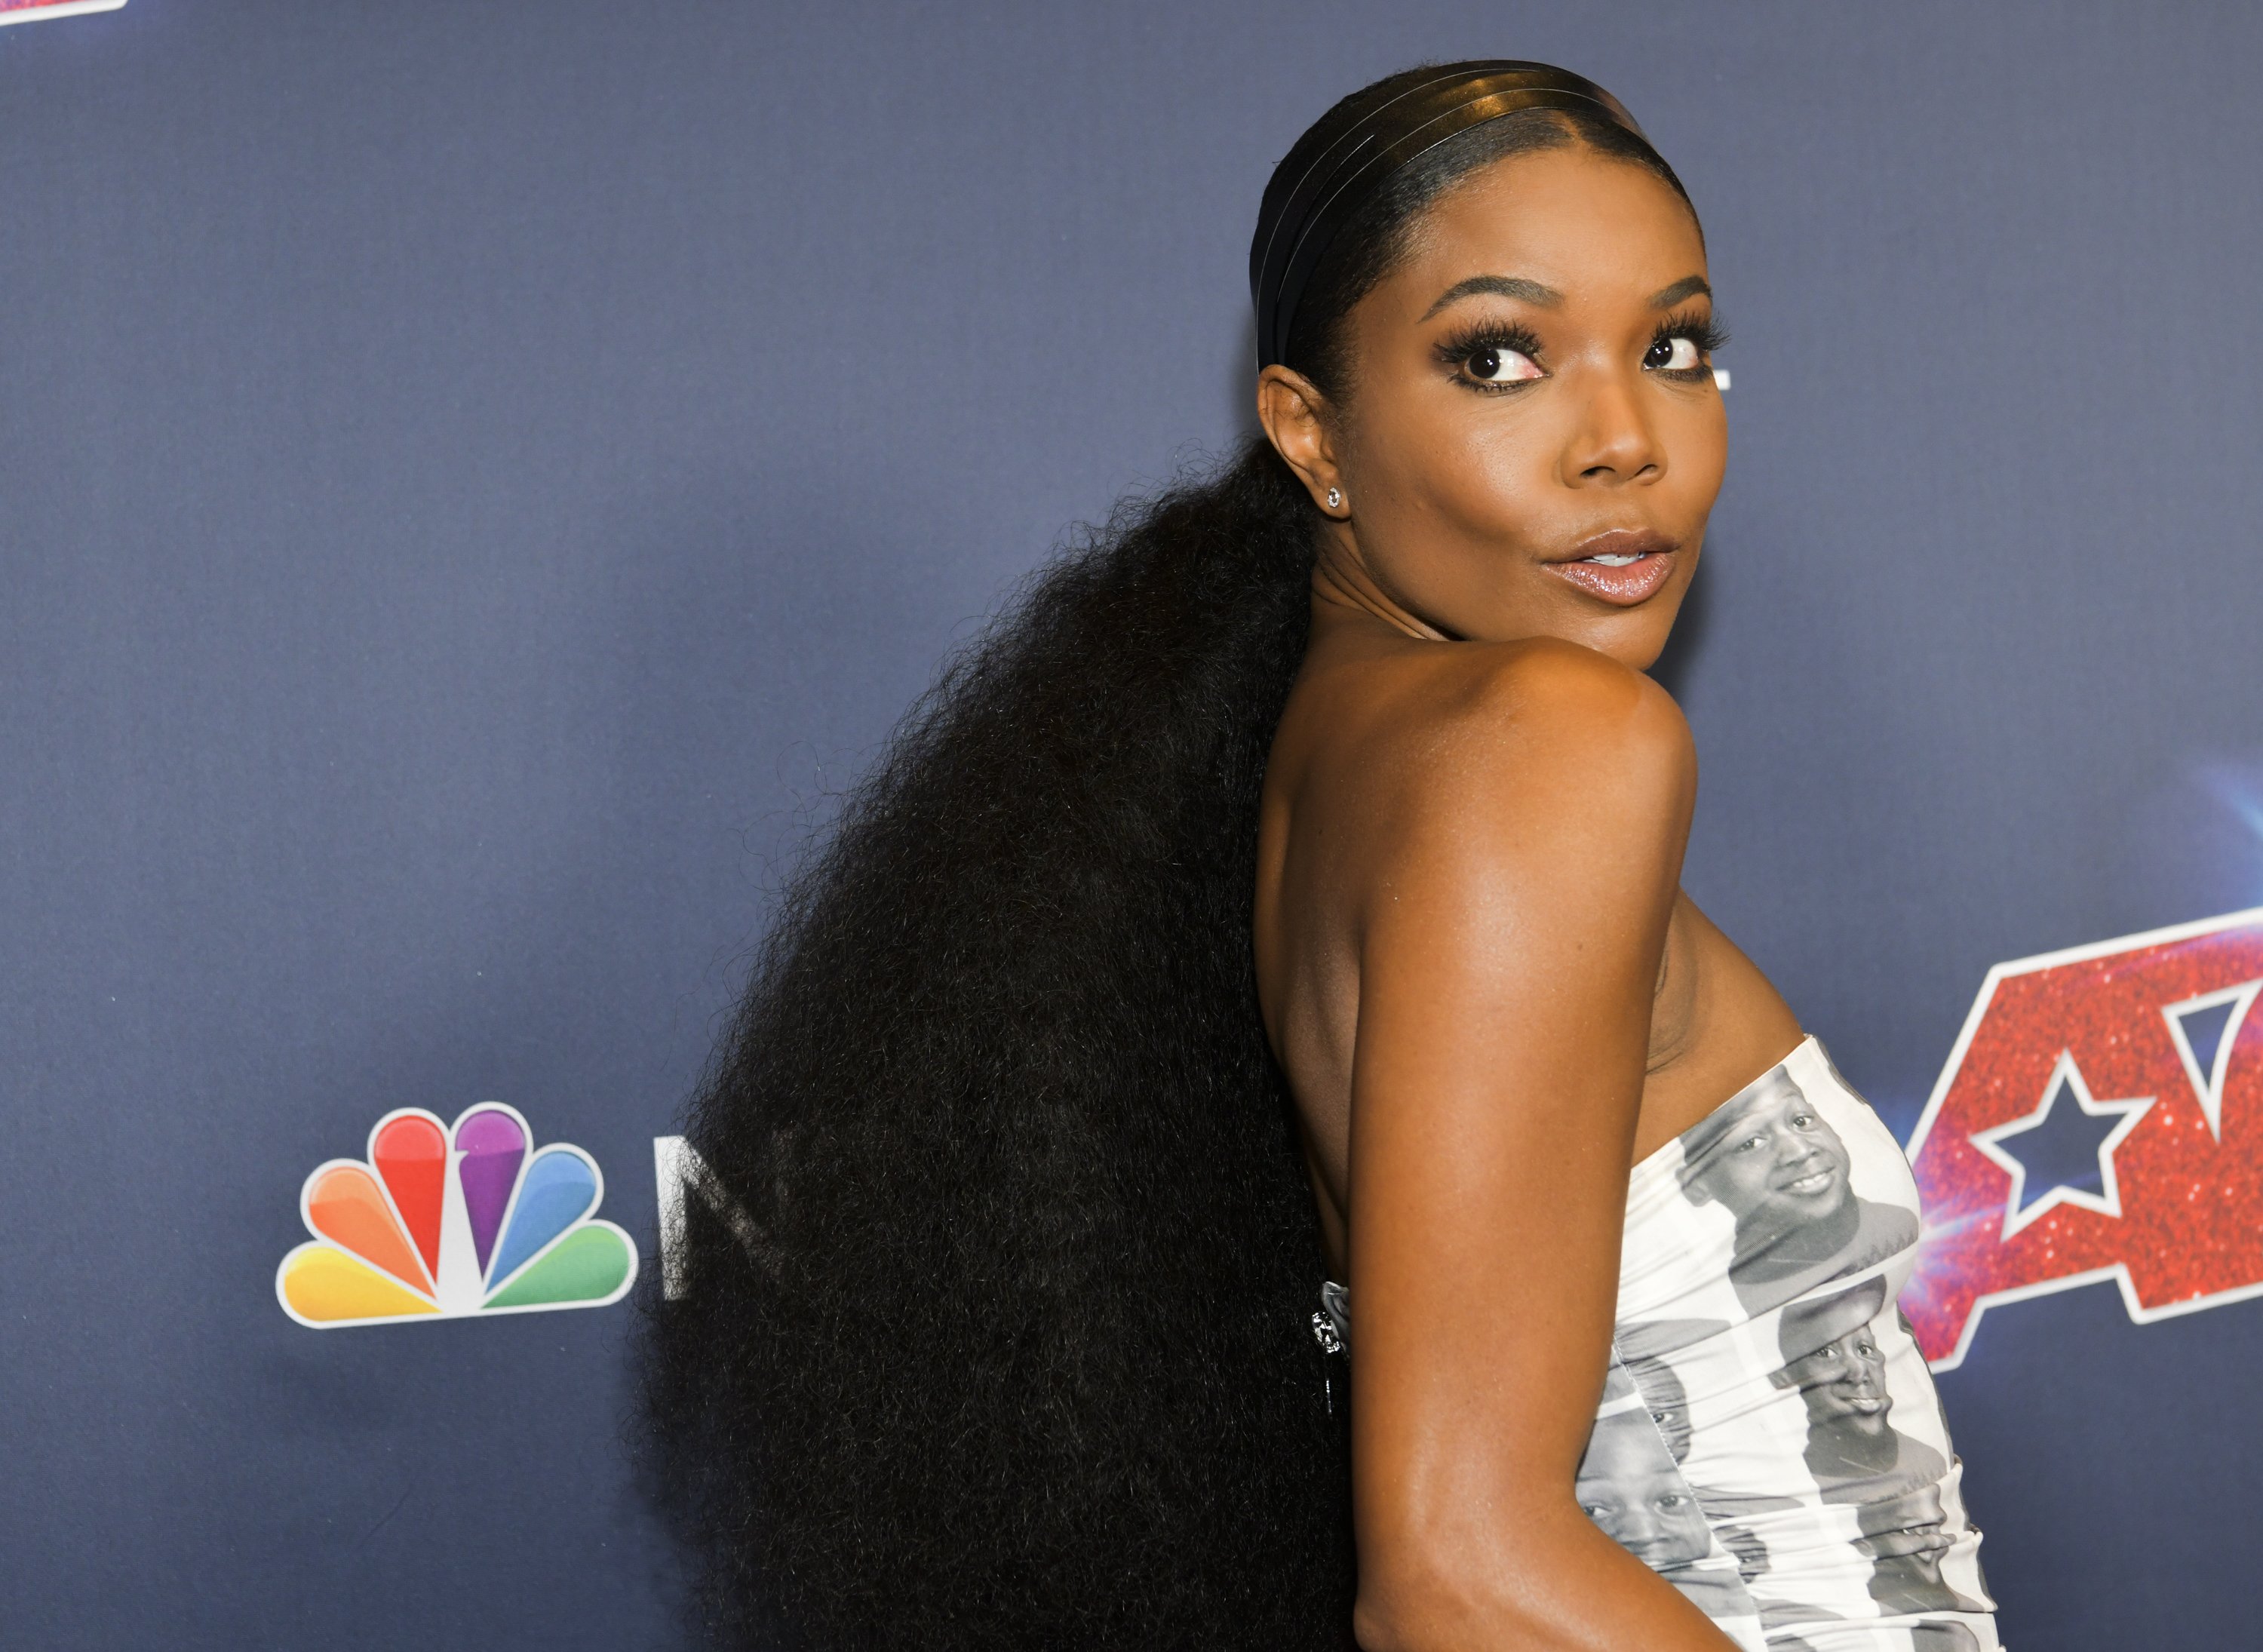 Gabrielle Union at the "America's Got Talent" Season 14 Live Show red carpet at Dolby Theatre in Hollywood, California on August 27, 2019. | Photo: Getty Images